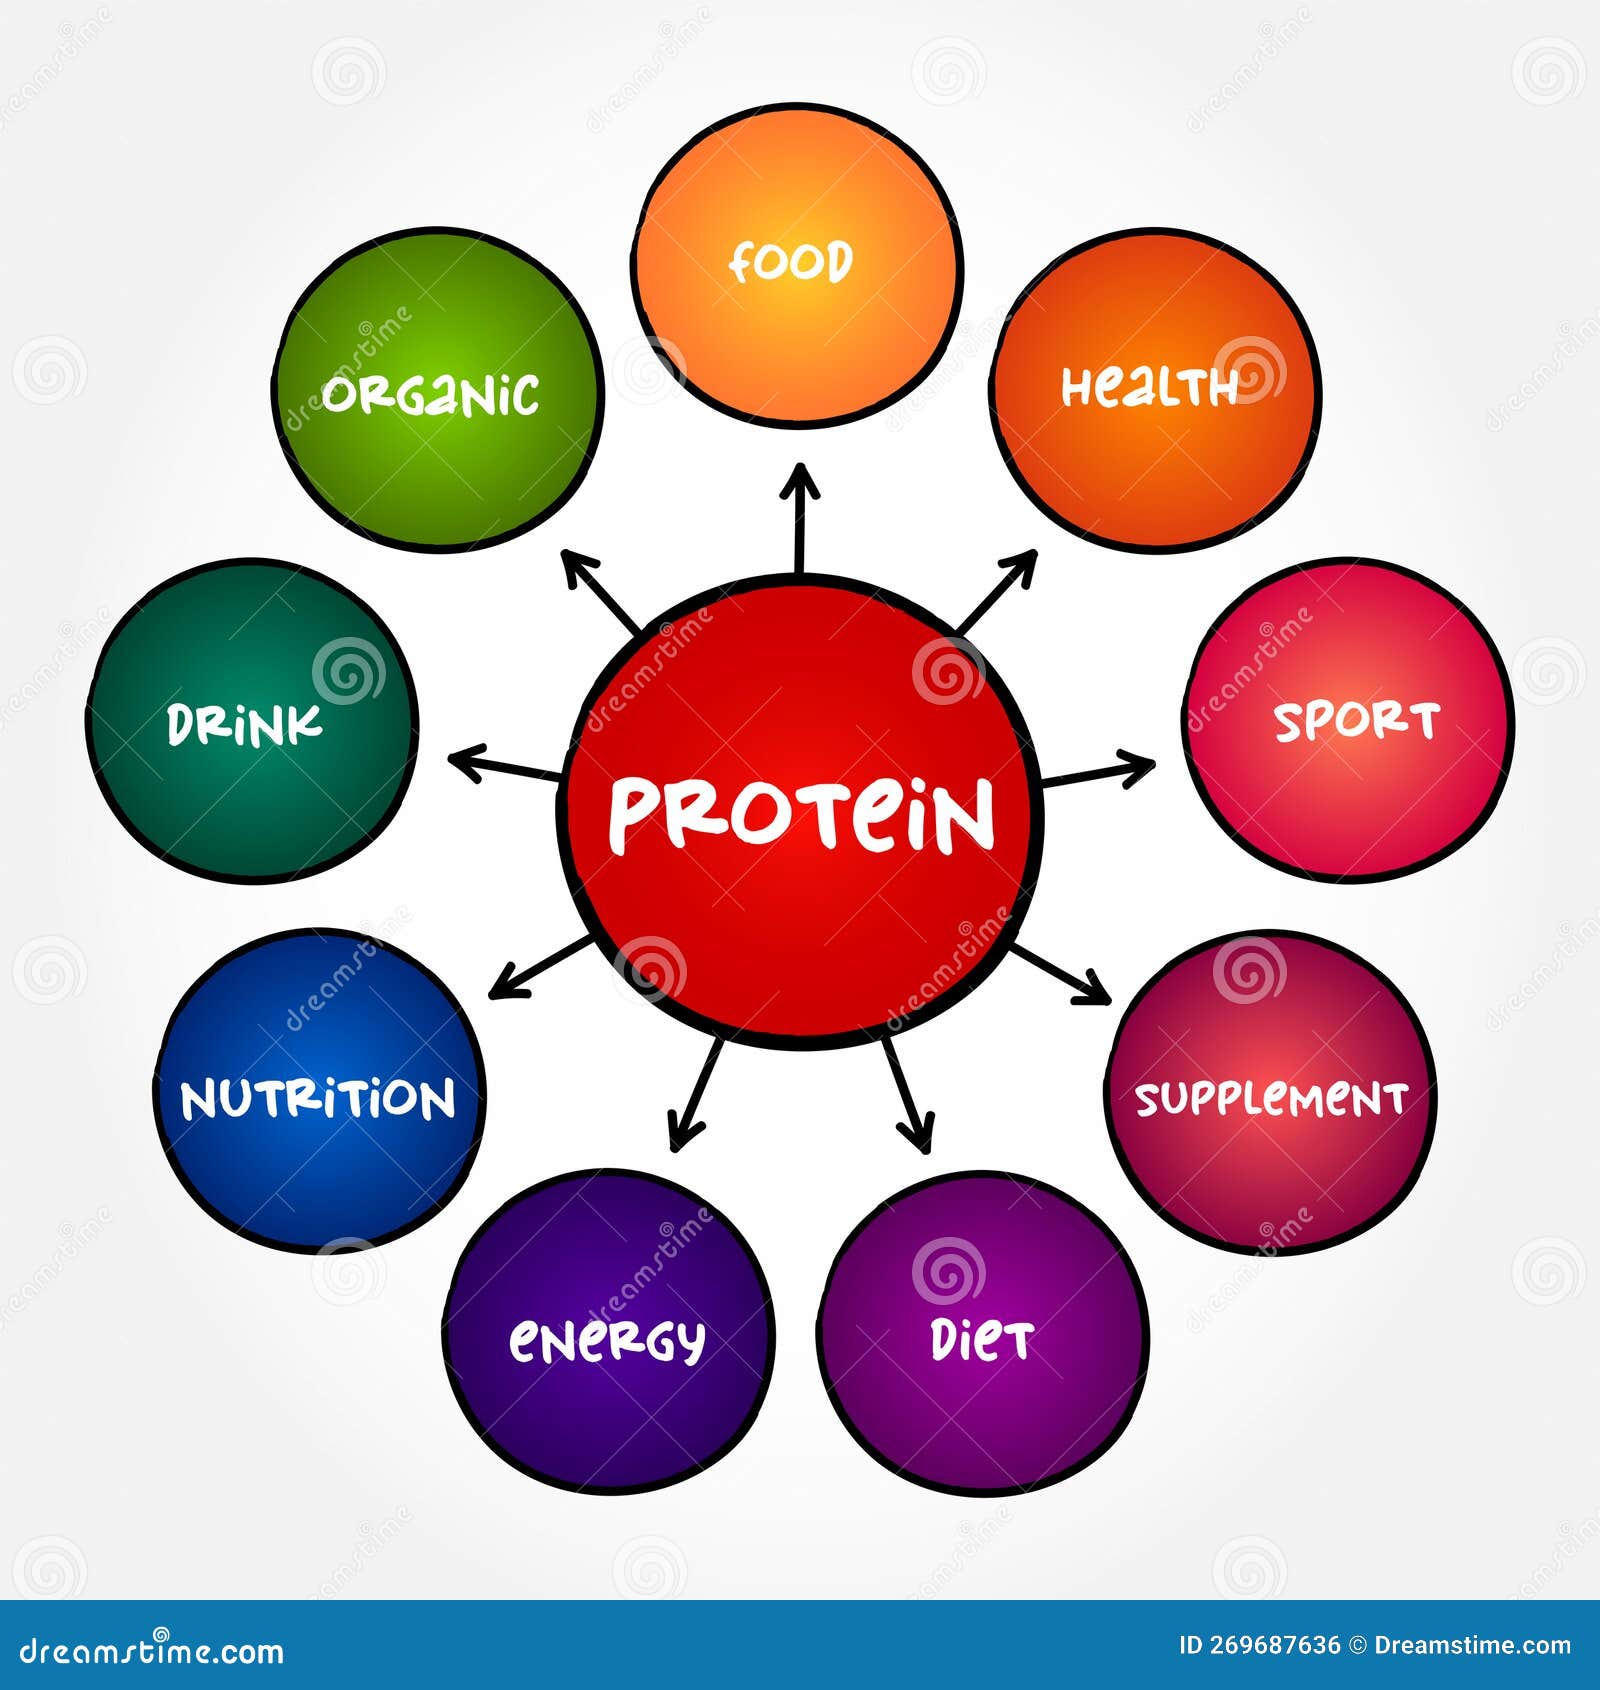 protein are large biomolecule and macromolecule that comprise one or more long chains of amino acid residues, mind map concept